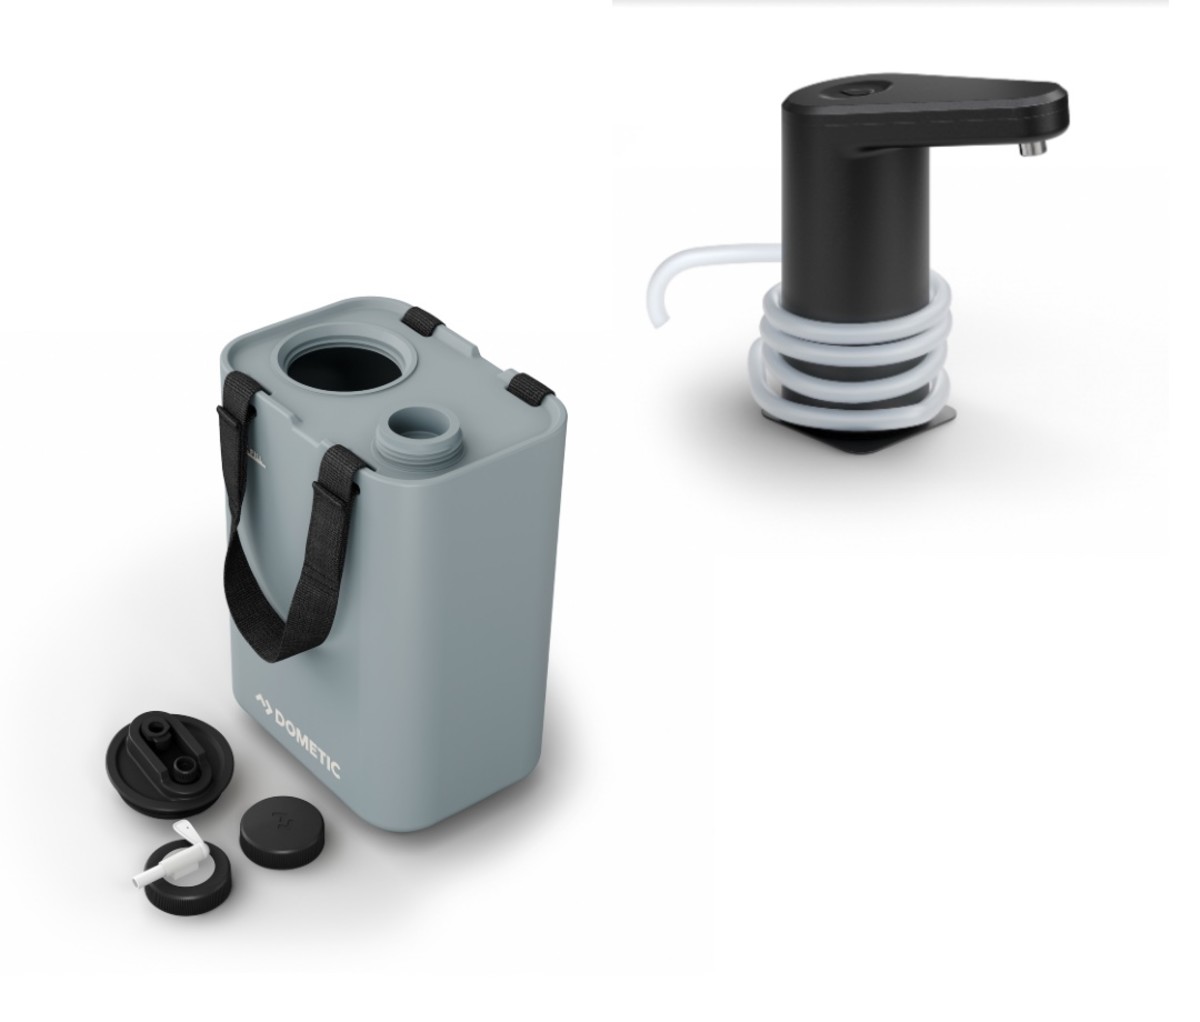 The combo of the Dometic GO Hydration Jug and Faucet make camp clean up easy and fun.